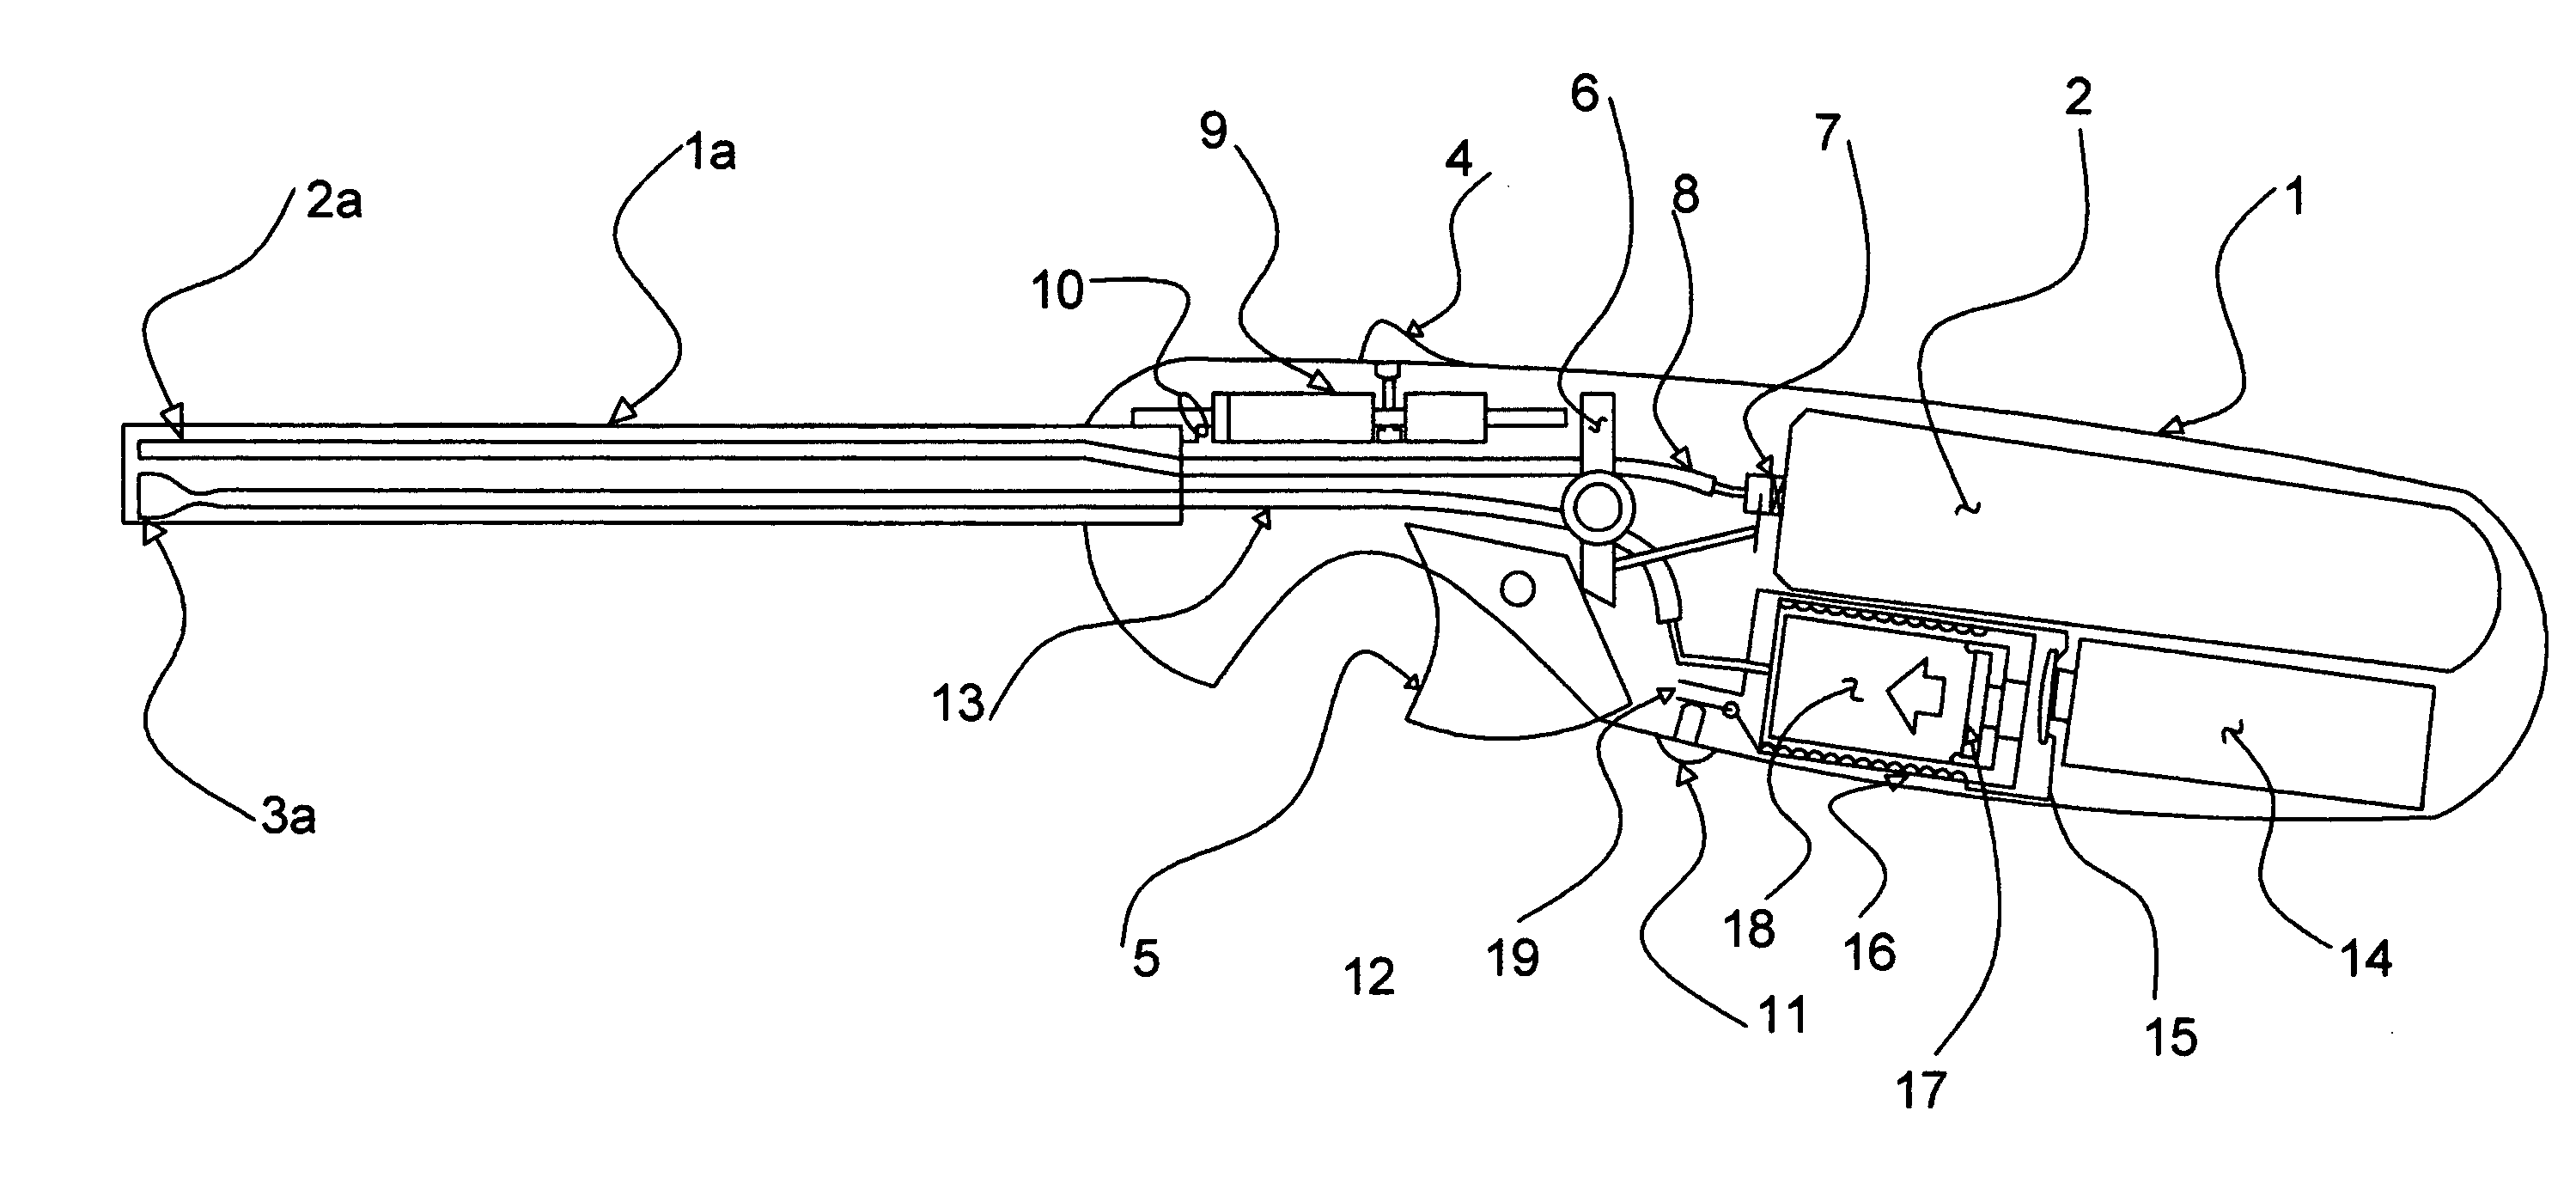 Single device to create flame and extinguish flame